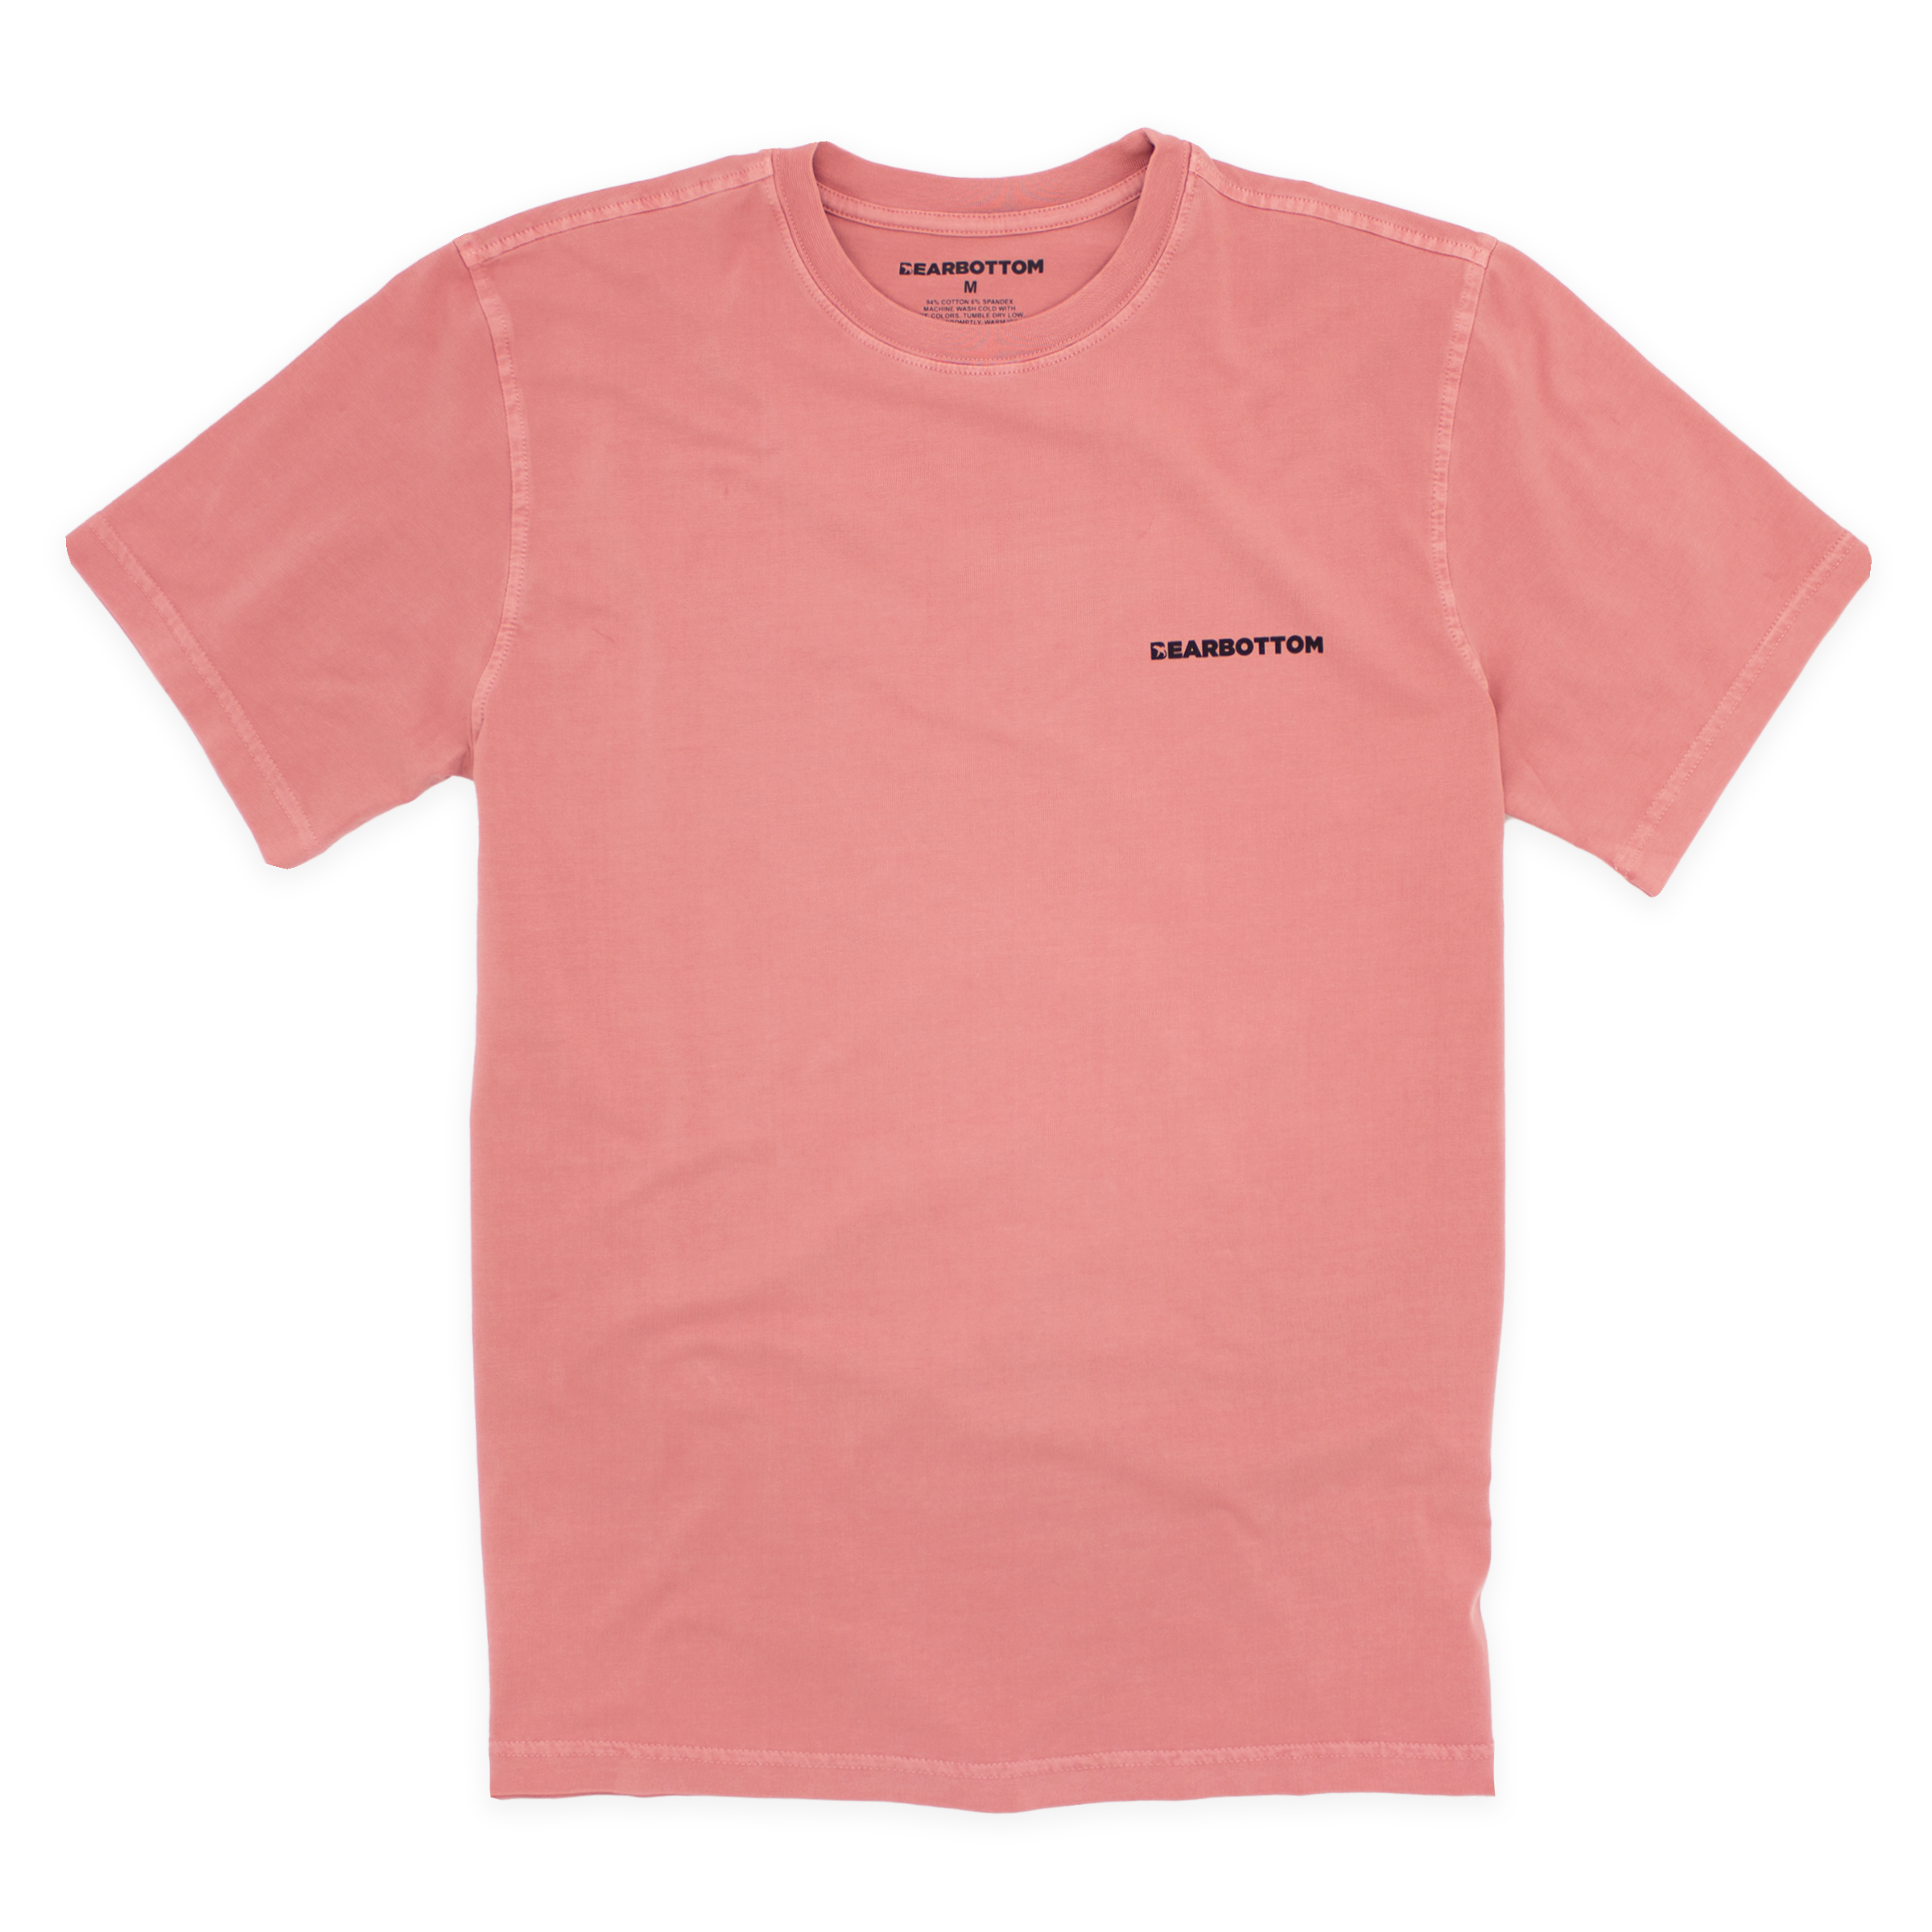 Natural Dye Logo Tee Coral Front with crew neck, short sleeves, and Bearbottom logo printed on front left chest